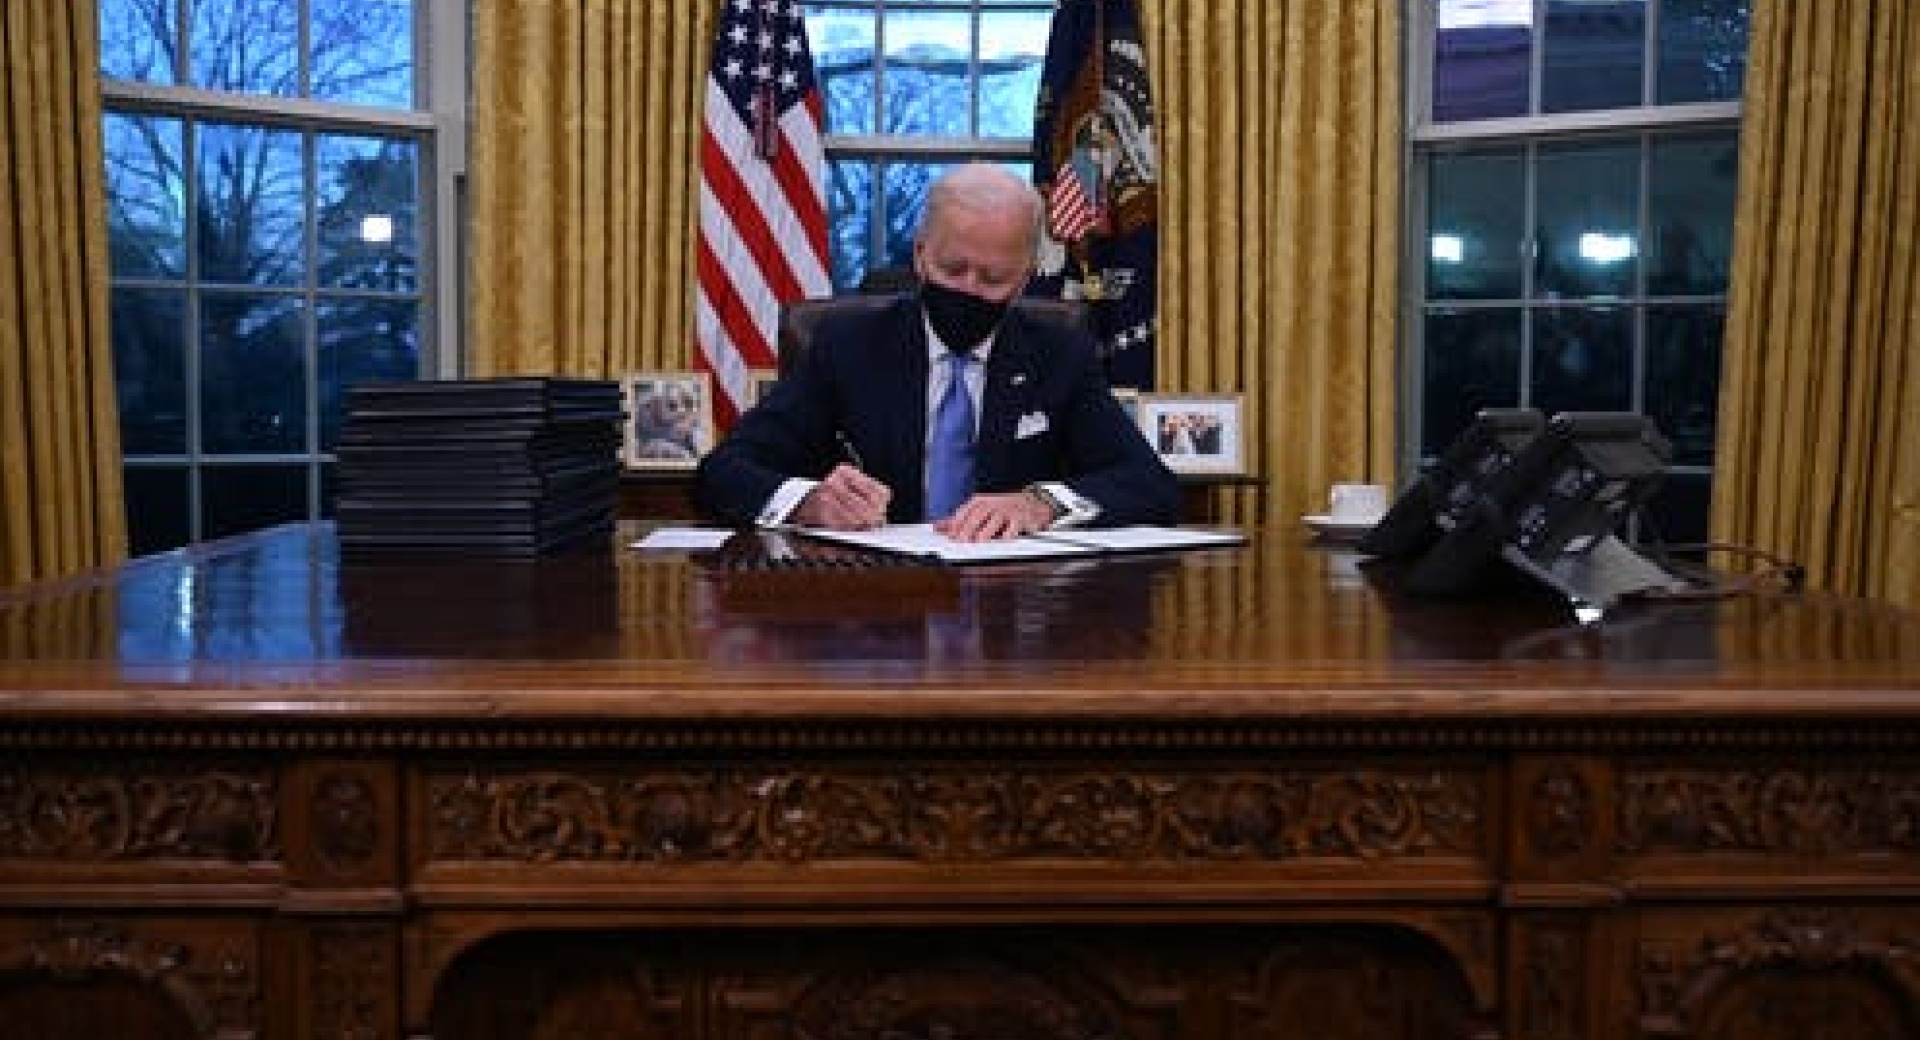 Biden's first 30 Days included many Executive Orders that Impact Community Action